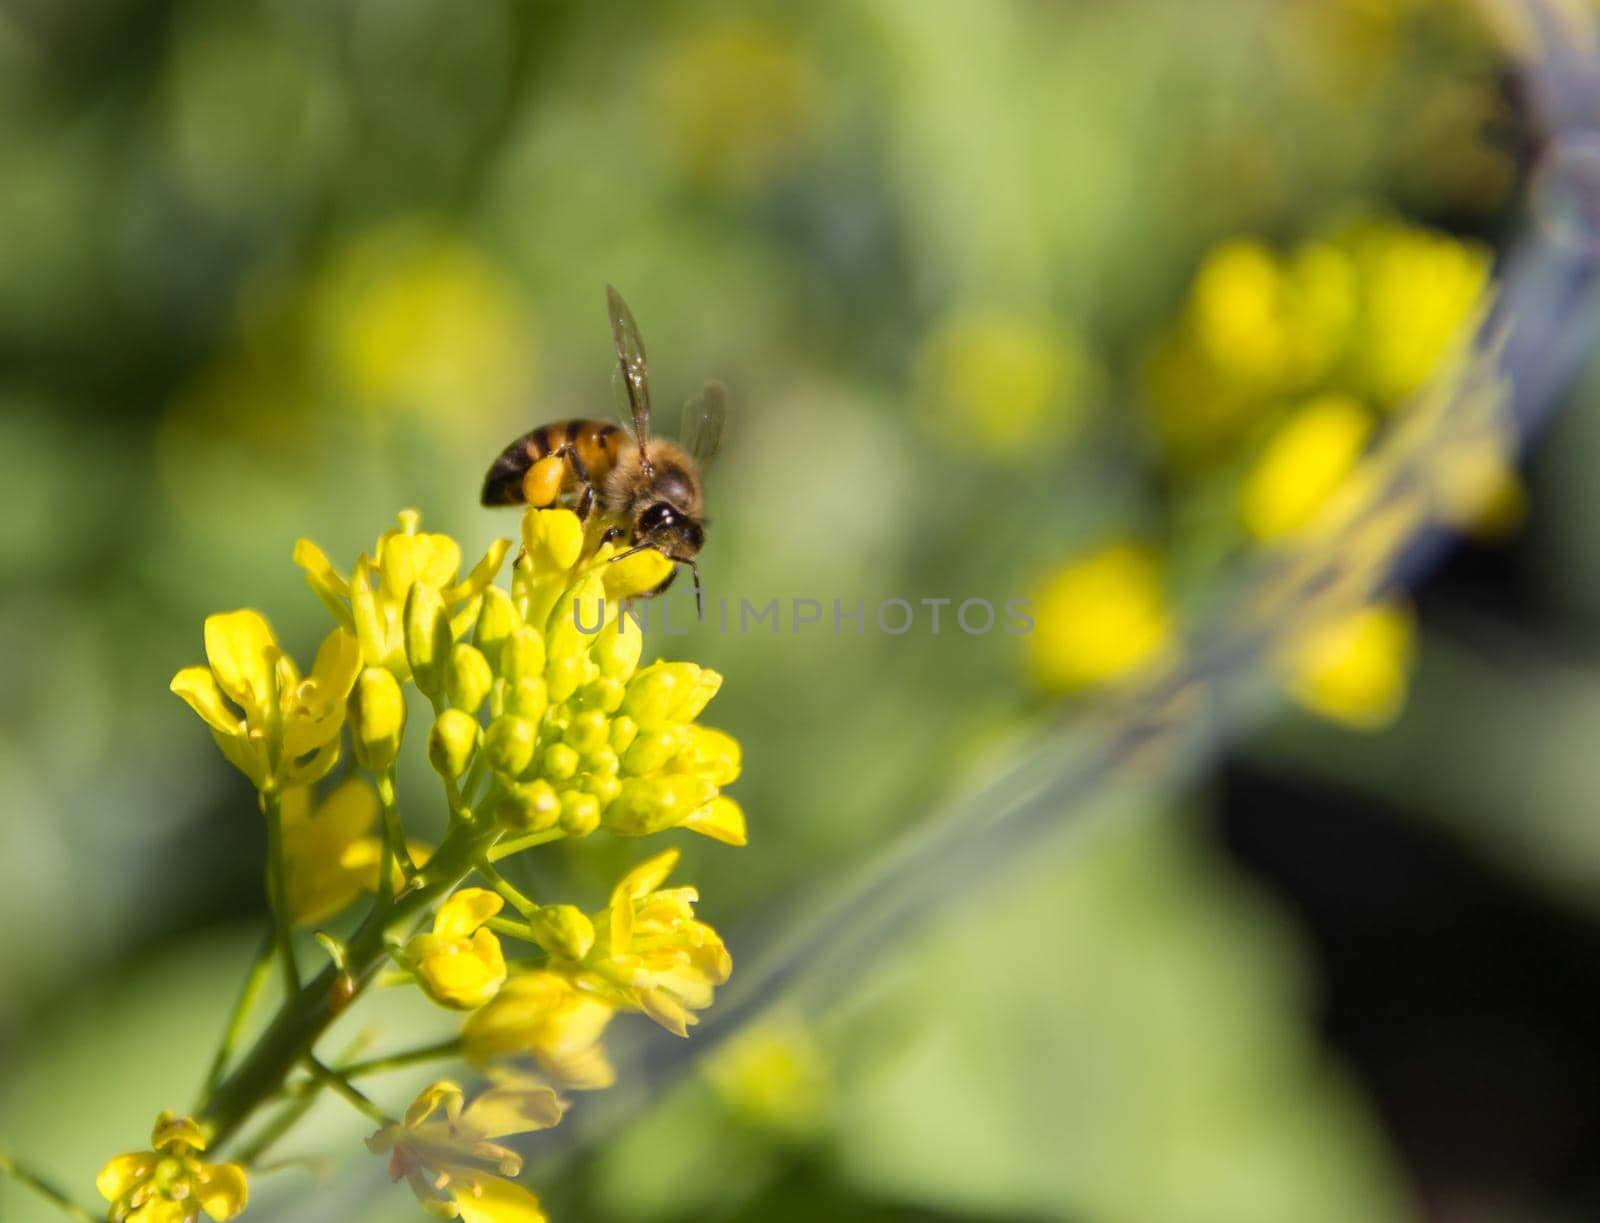 a close up of a bee on flowered mustard by GabrielaBertolini